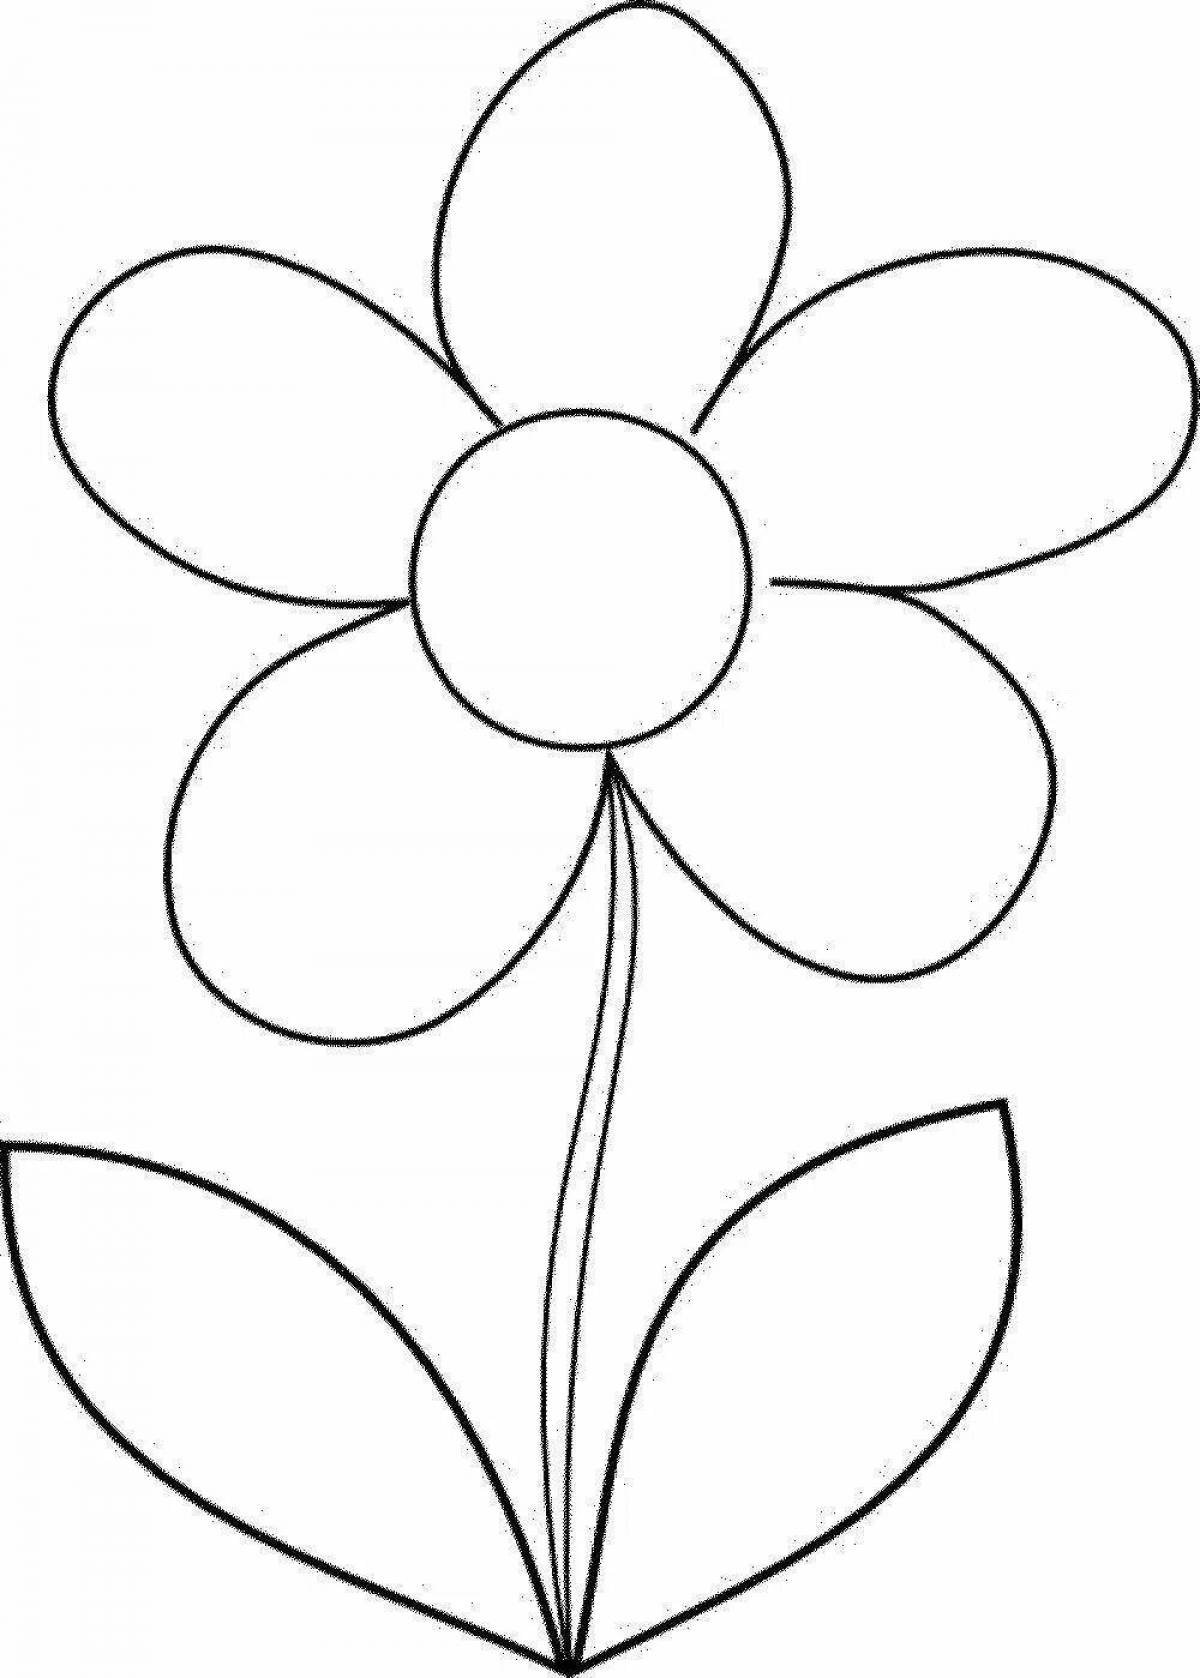 Shining Daisy coloring book for kids